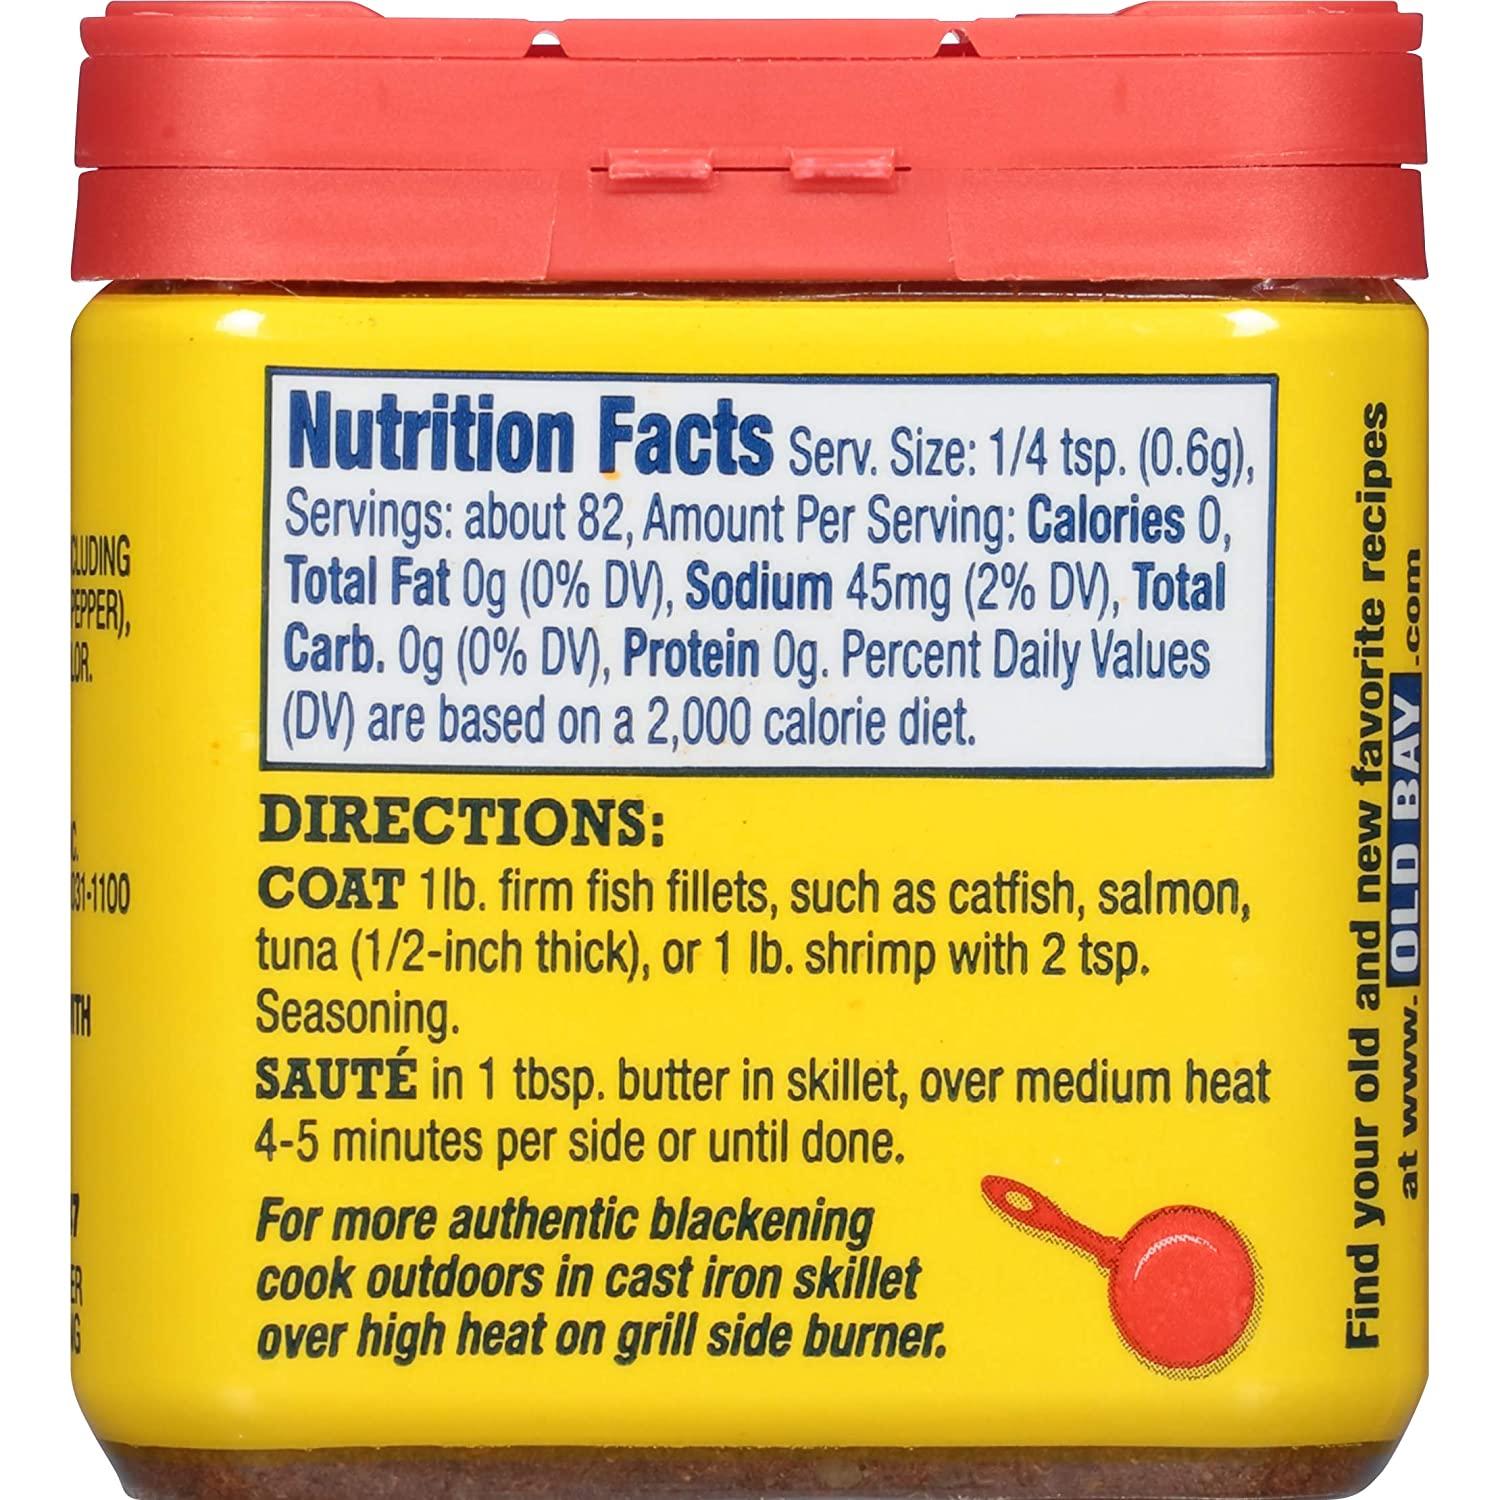 Old Bay Seasoning with 30 Percent Less Sodium - 2.62 oz. can